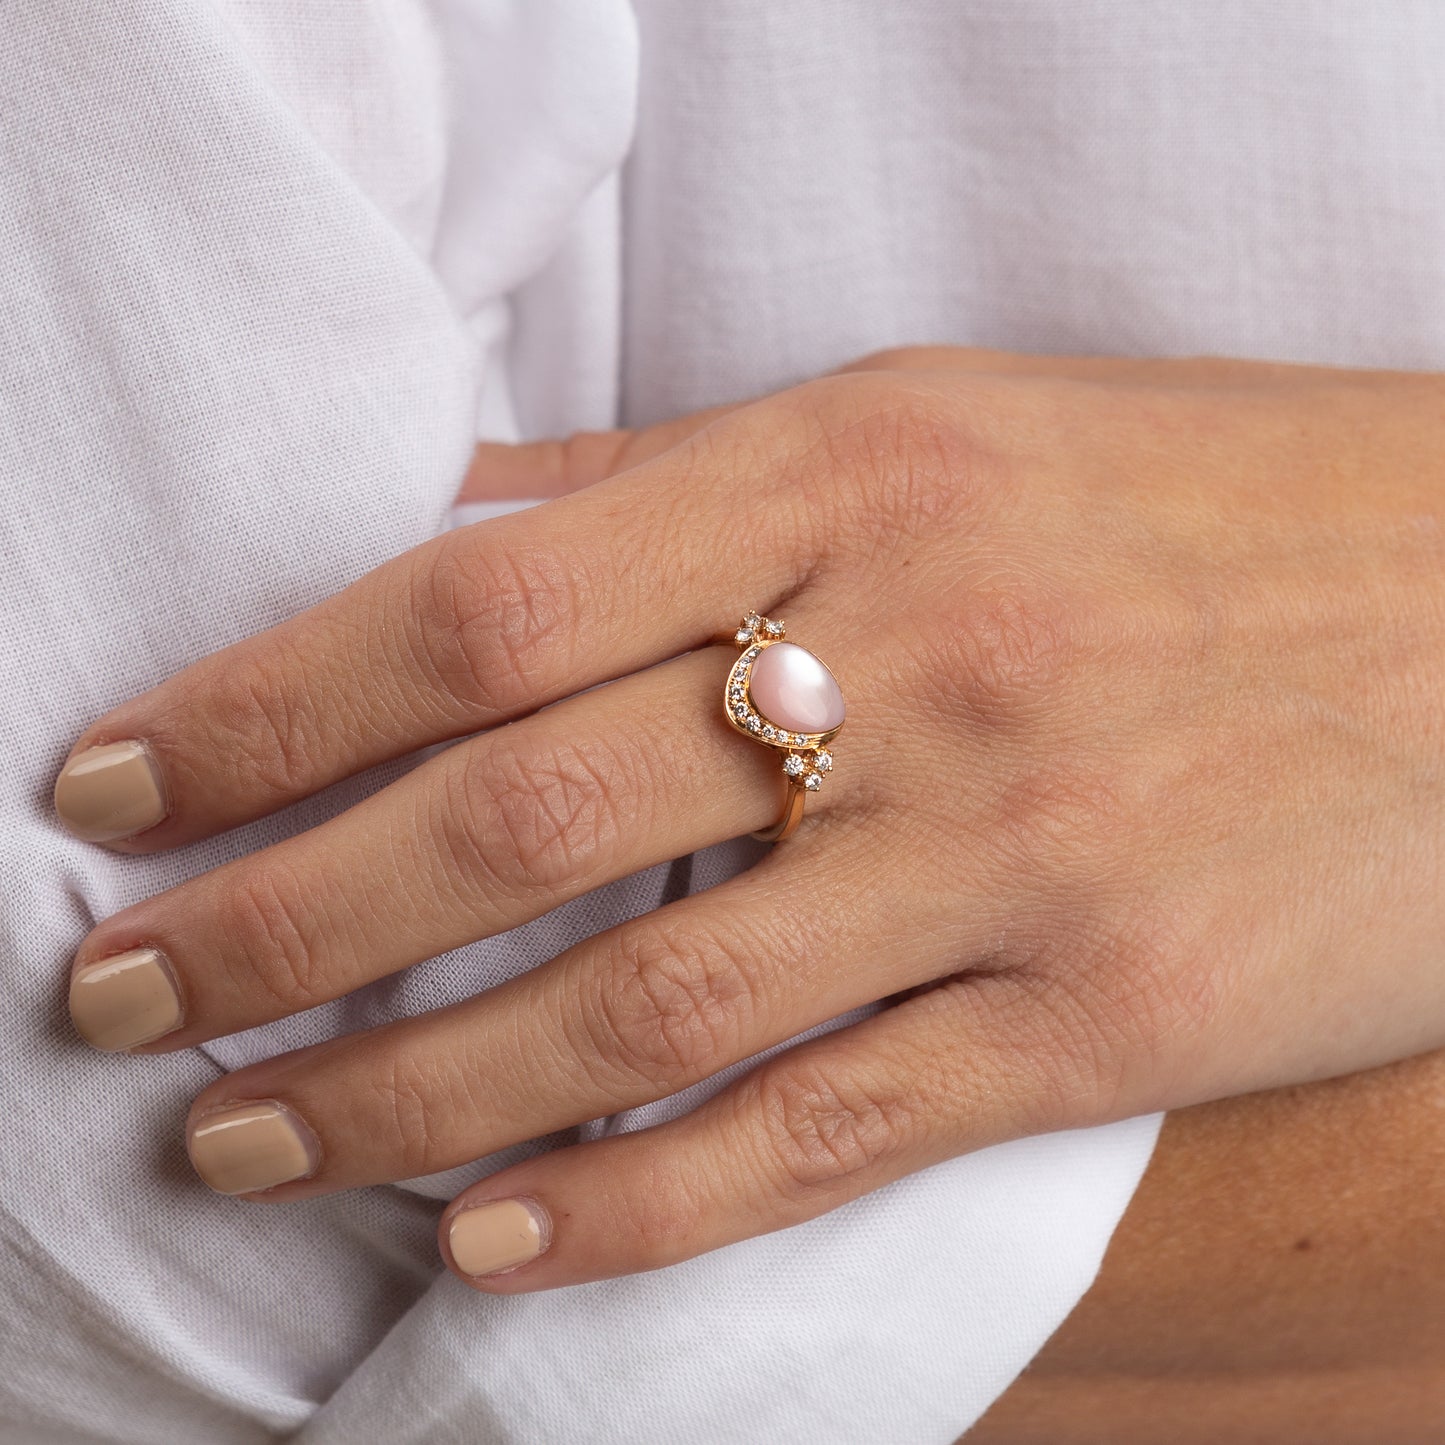 The Mother of Pearl Ring